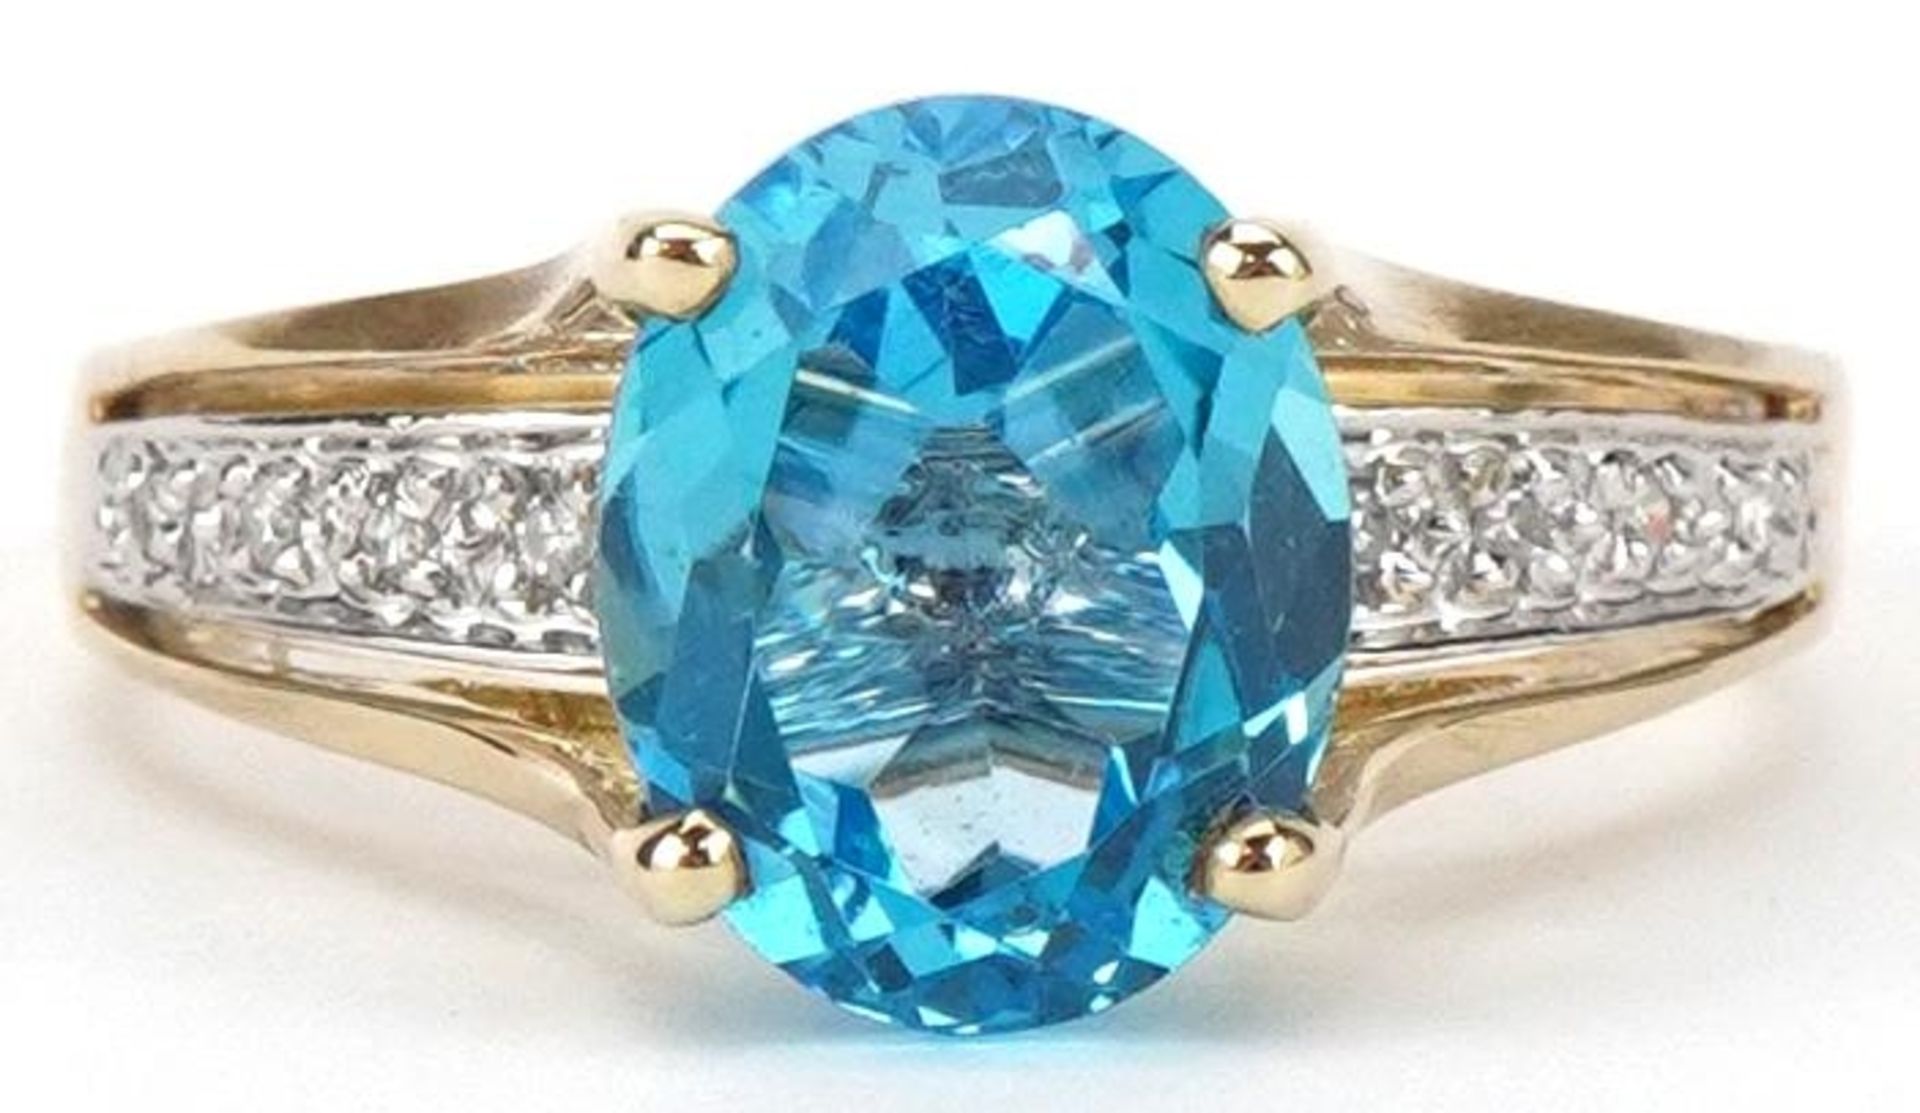 9ct gold blue topaz solitaire ring with diamond set shoulders, size P/Q, 3.3g